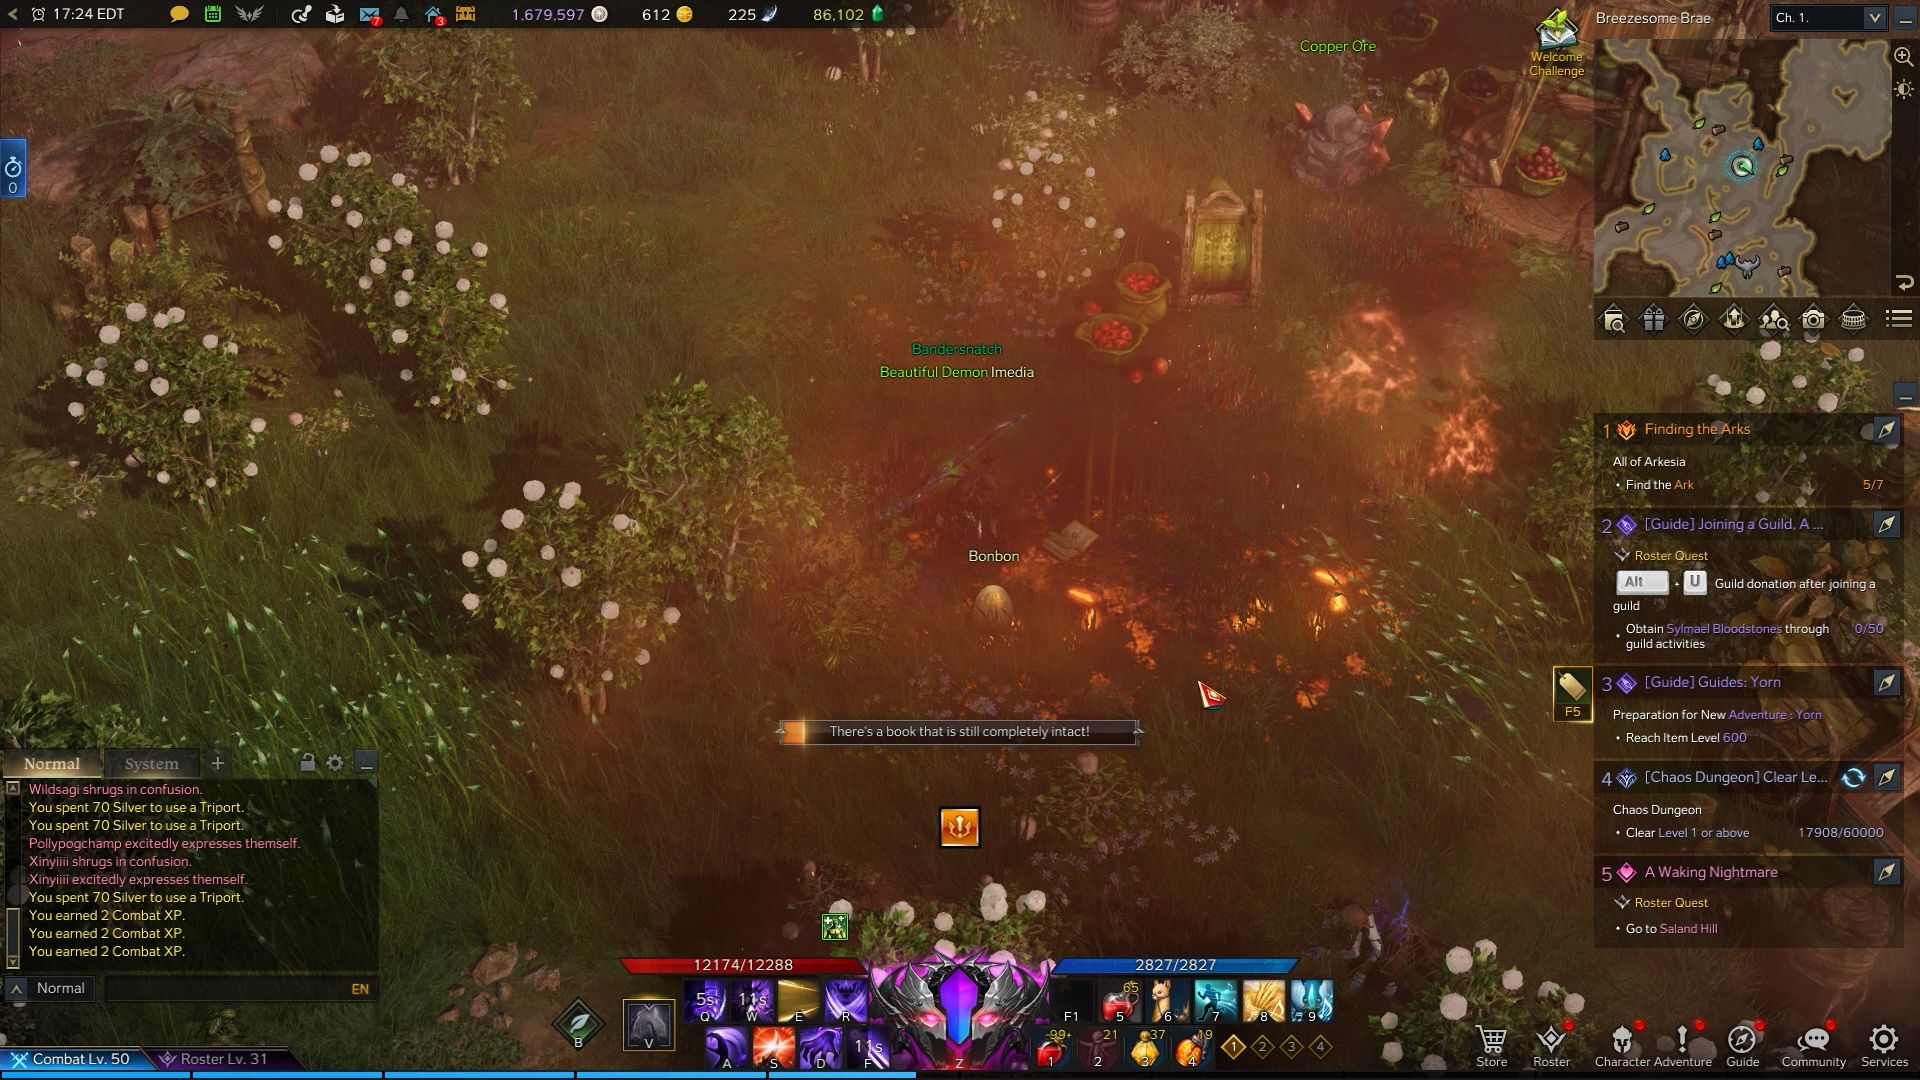 A player collects a book in a burning field of Breezesome Brae